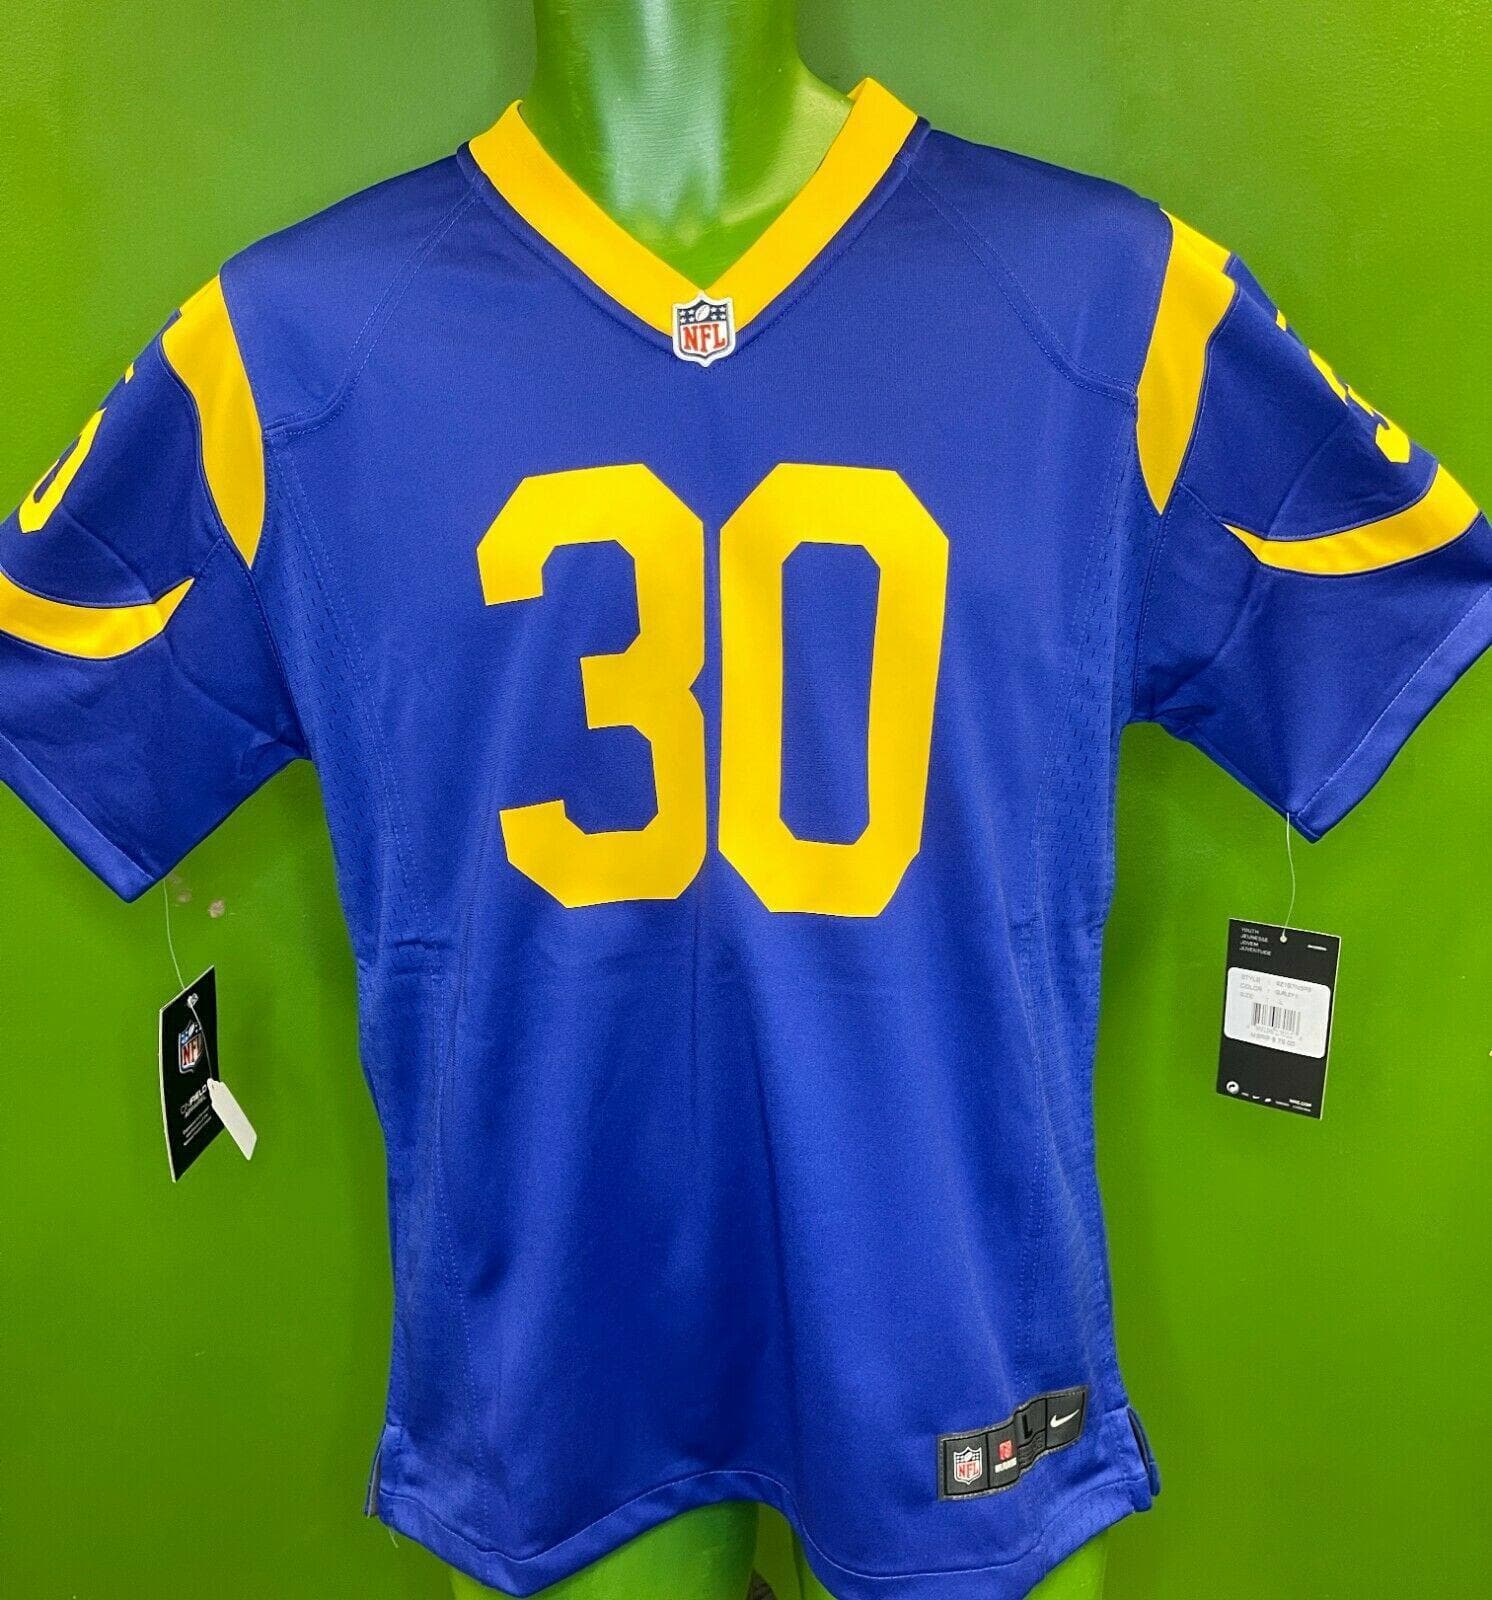 NFL Los Angeles Rams Todd Gurley #30 Game Jersey Youth Large NWT